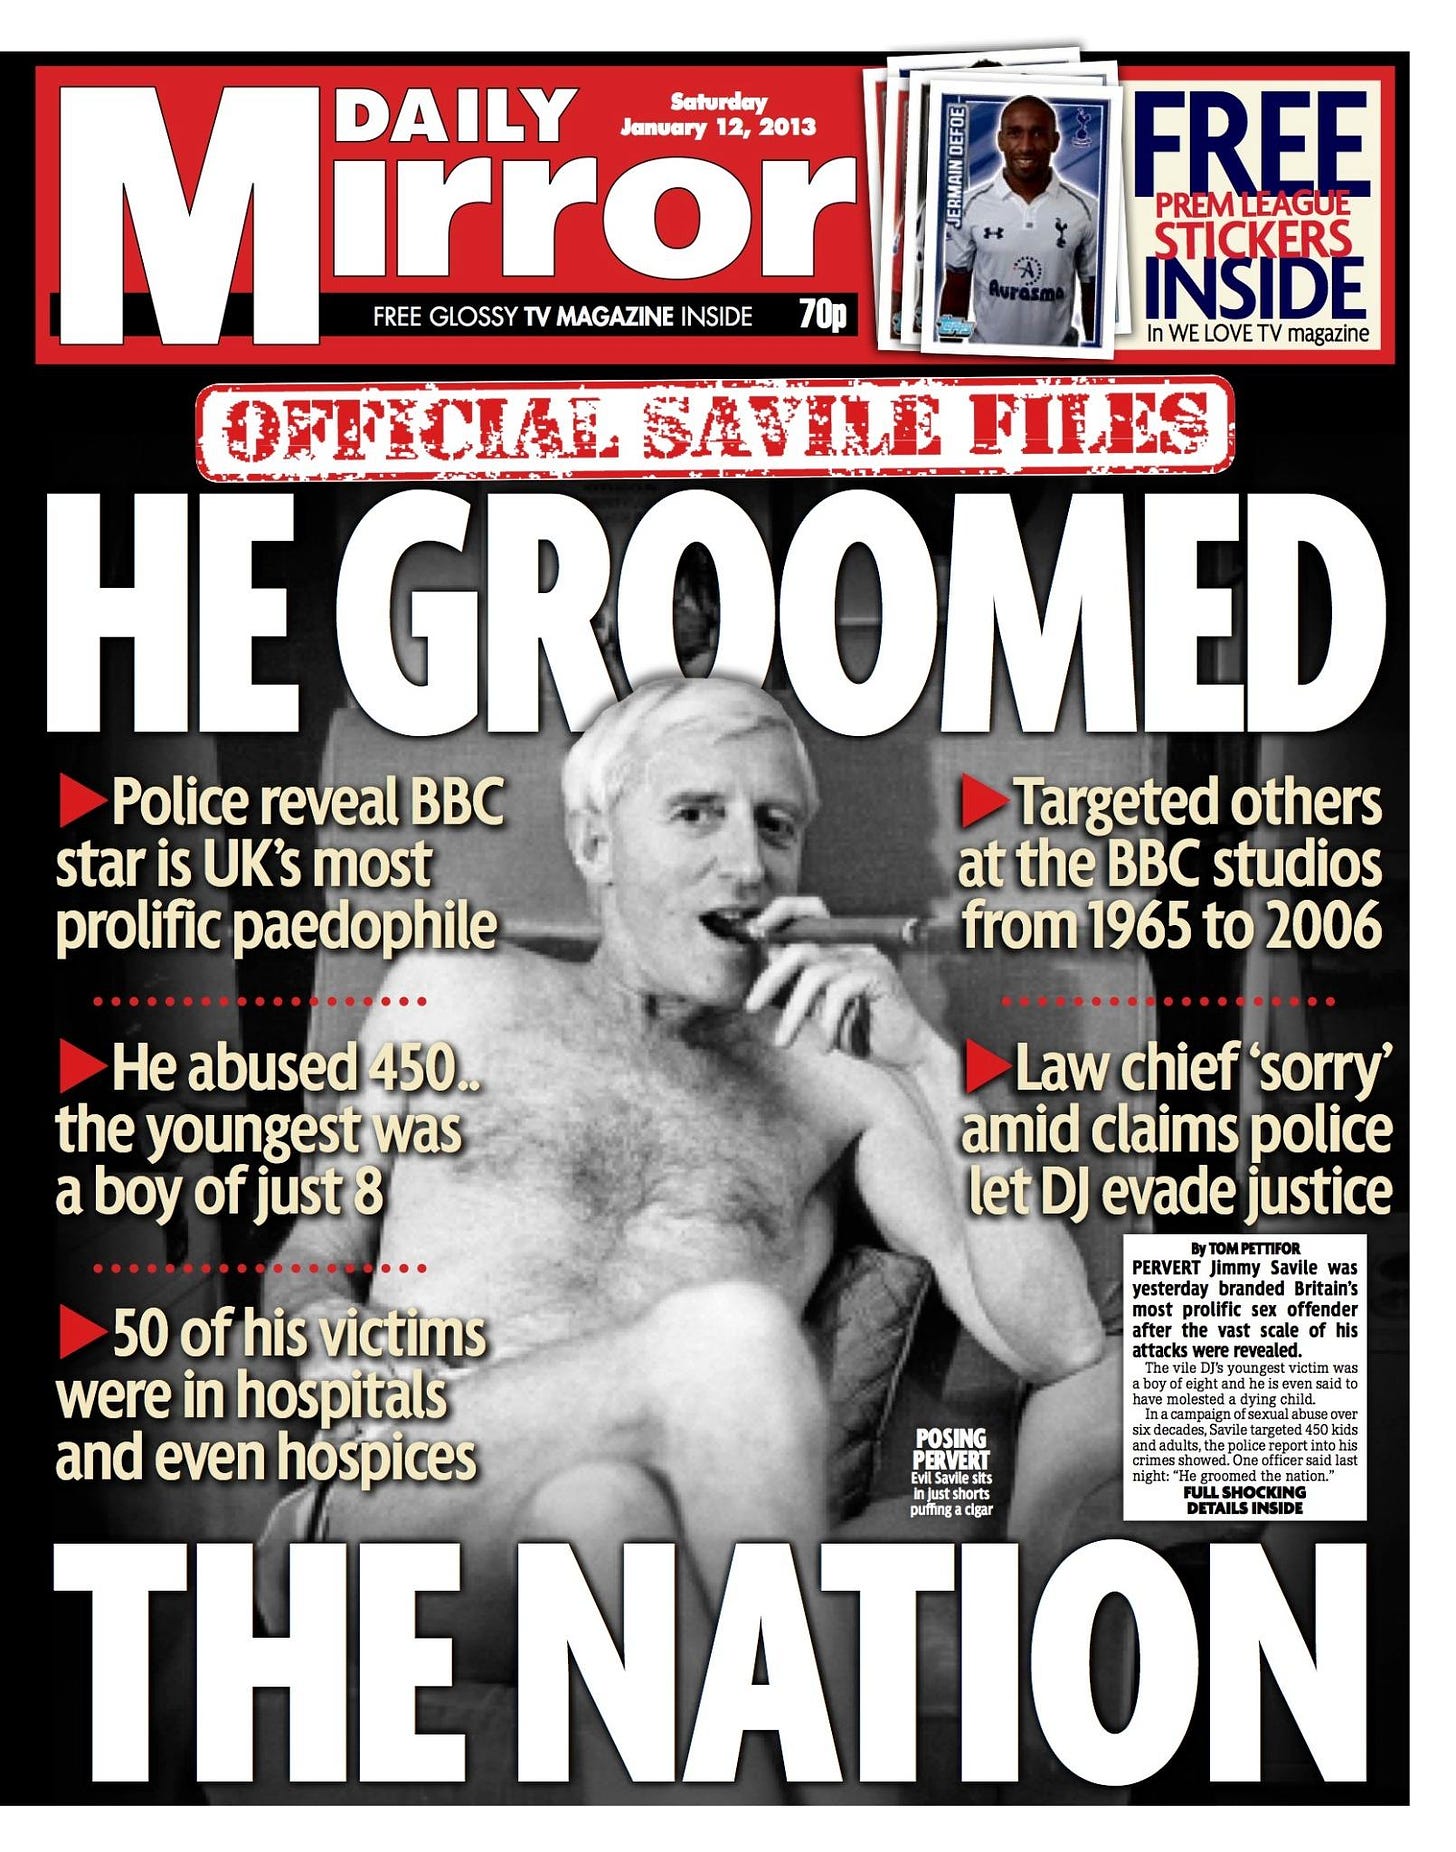 The Mirror on X: "Saturday's Daily Mirror front page... He groomed the  nation: Jimmy Savile was UK's most prolific paedophile  http://t.co/h2togDPR" / X